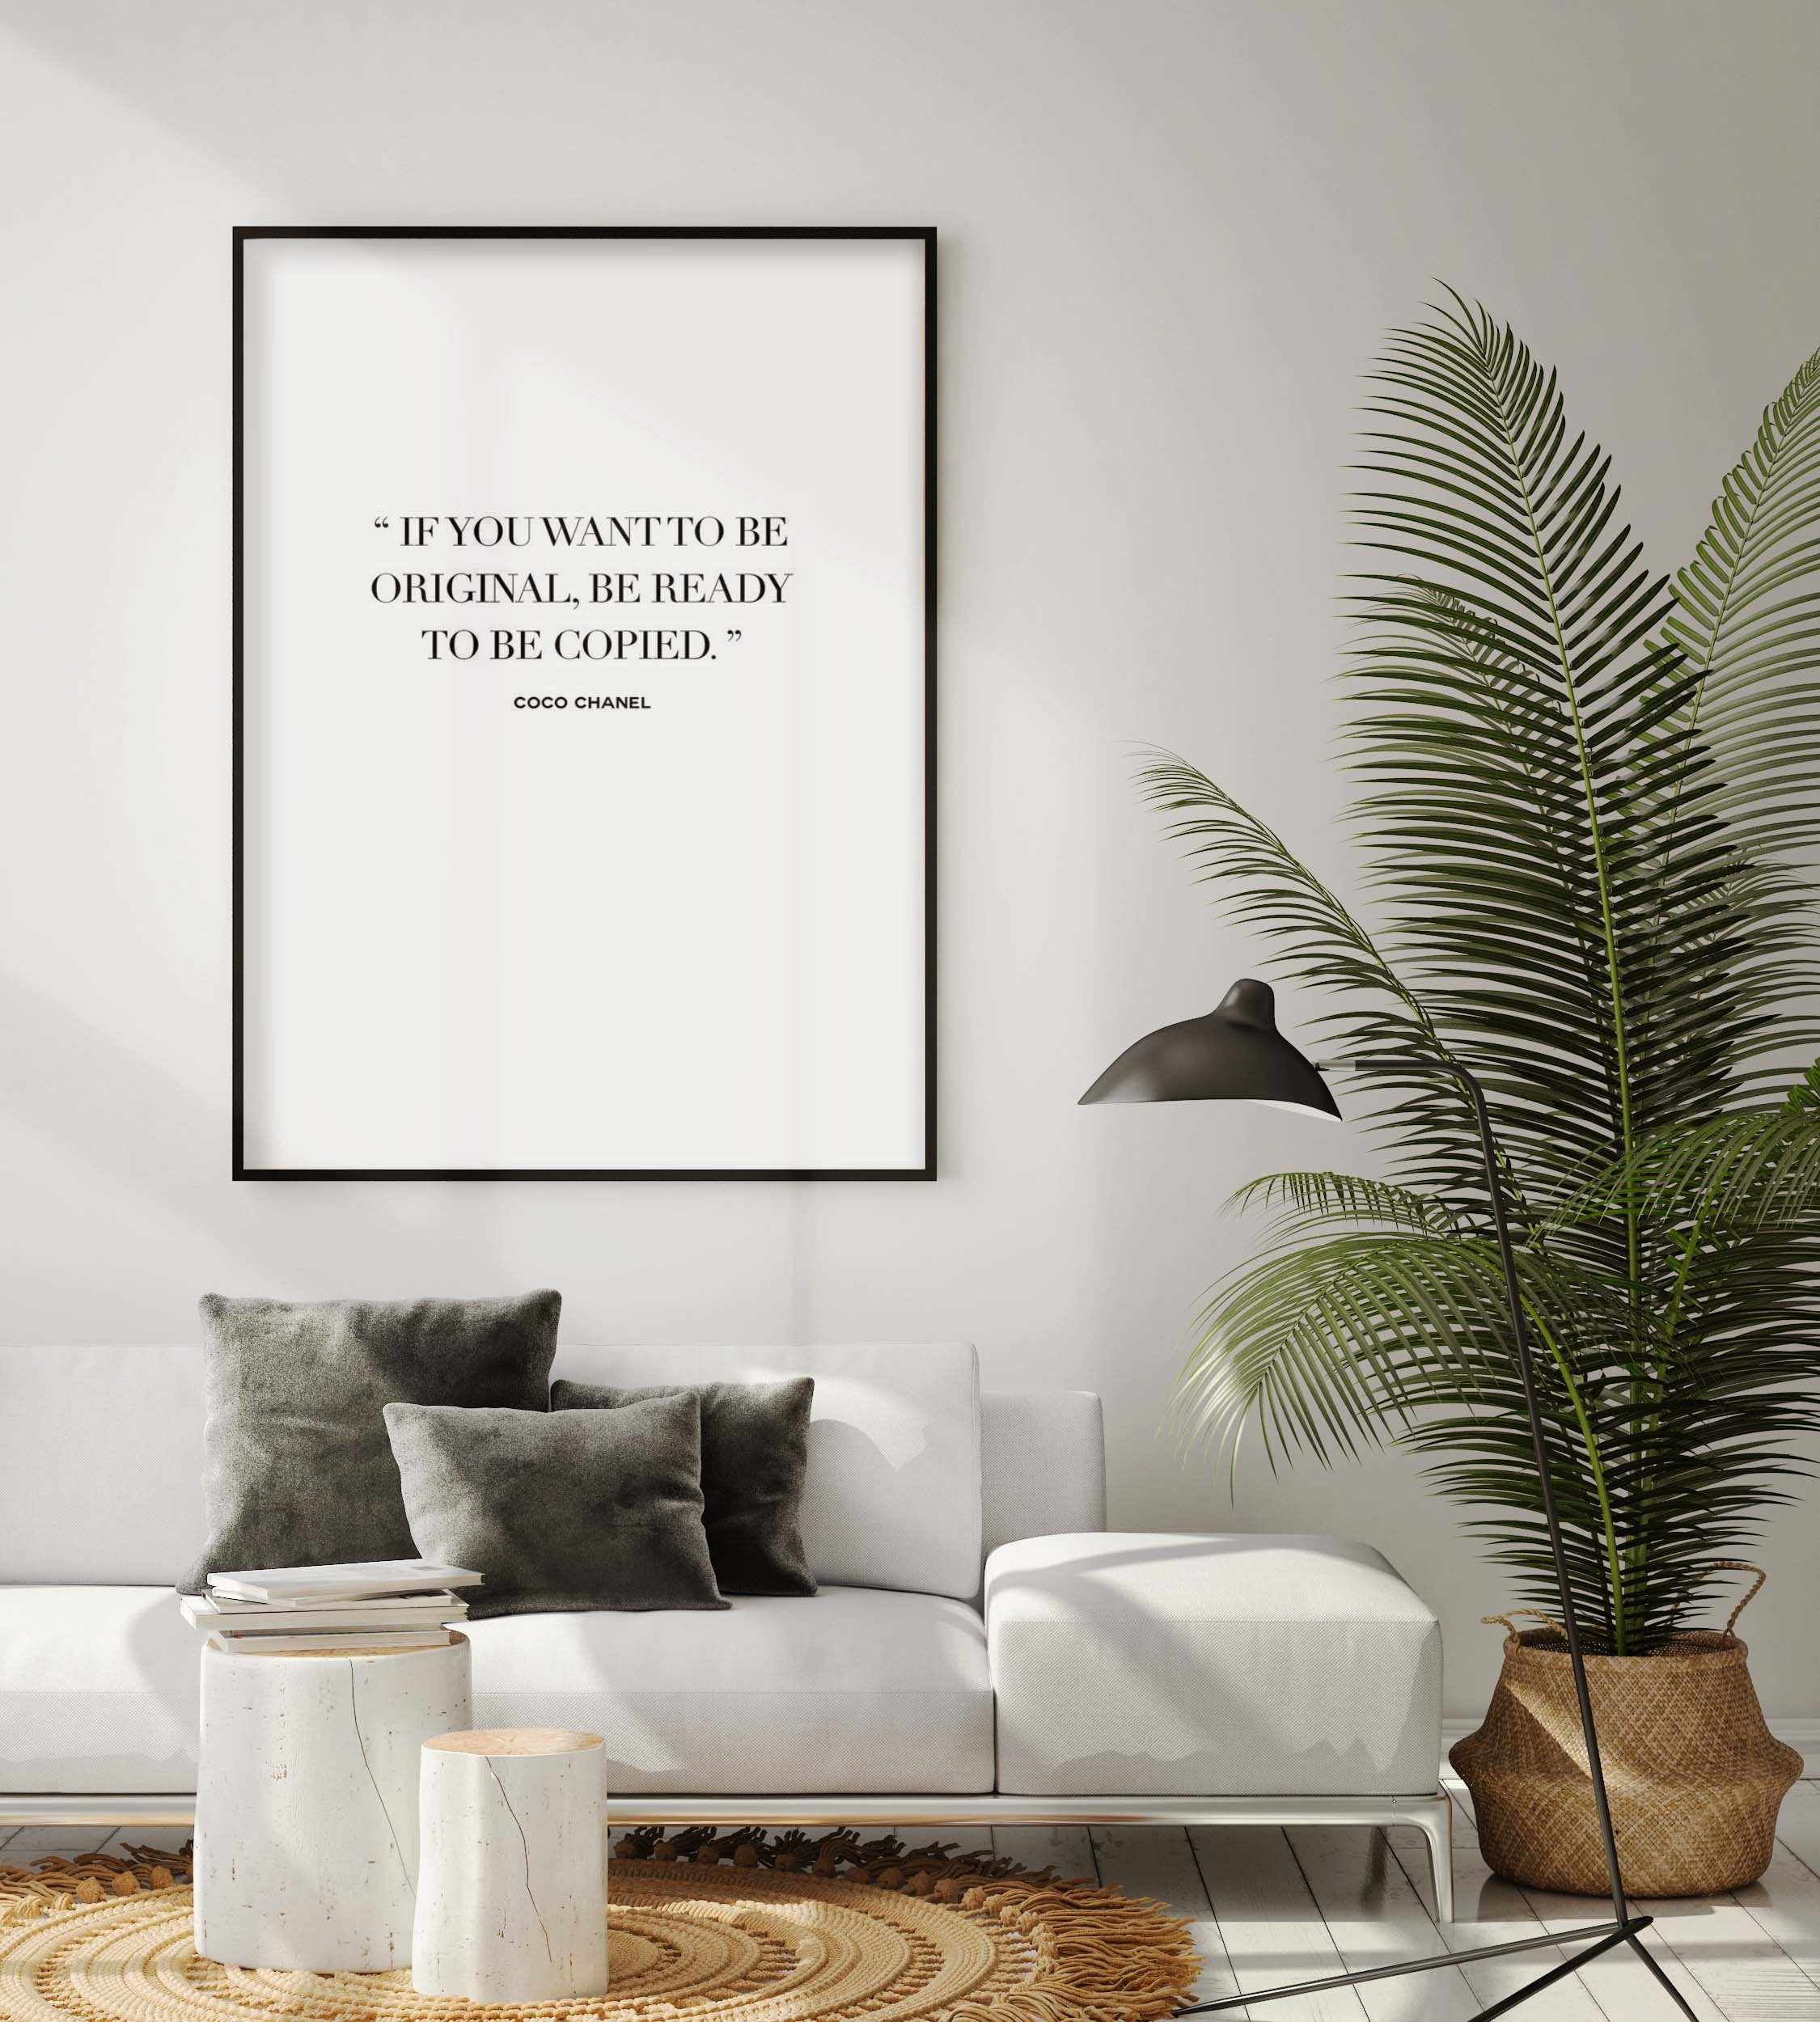 Coco Chanel Inspirational Quote Wall Decor Picture - India